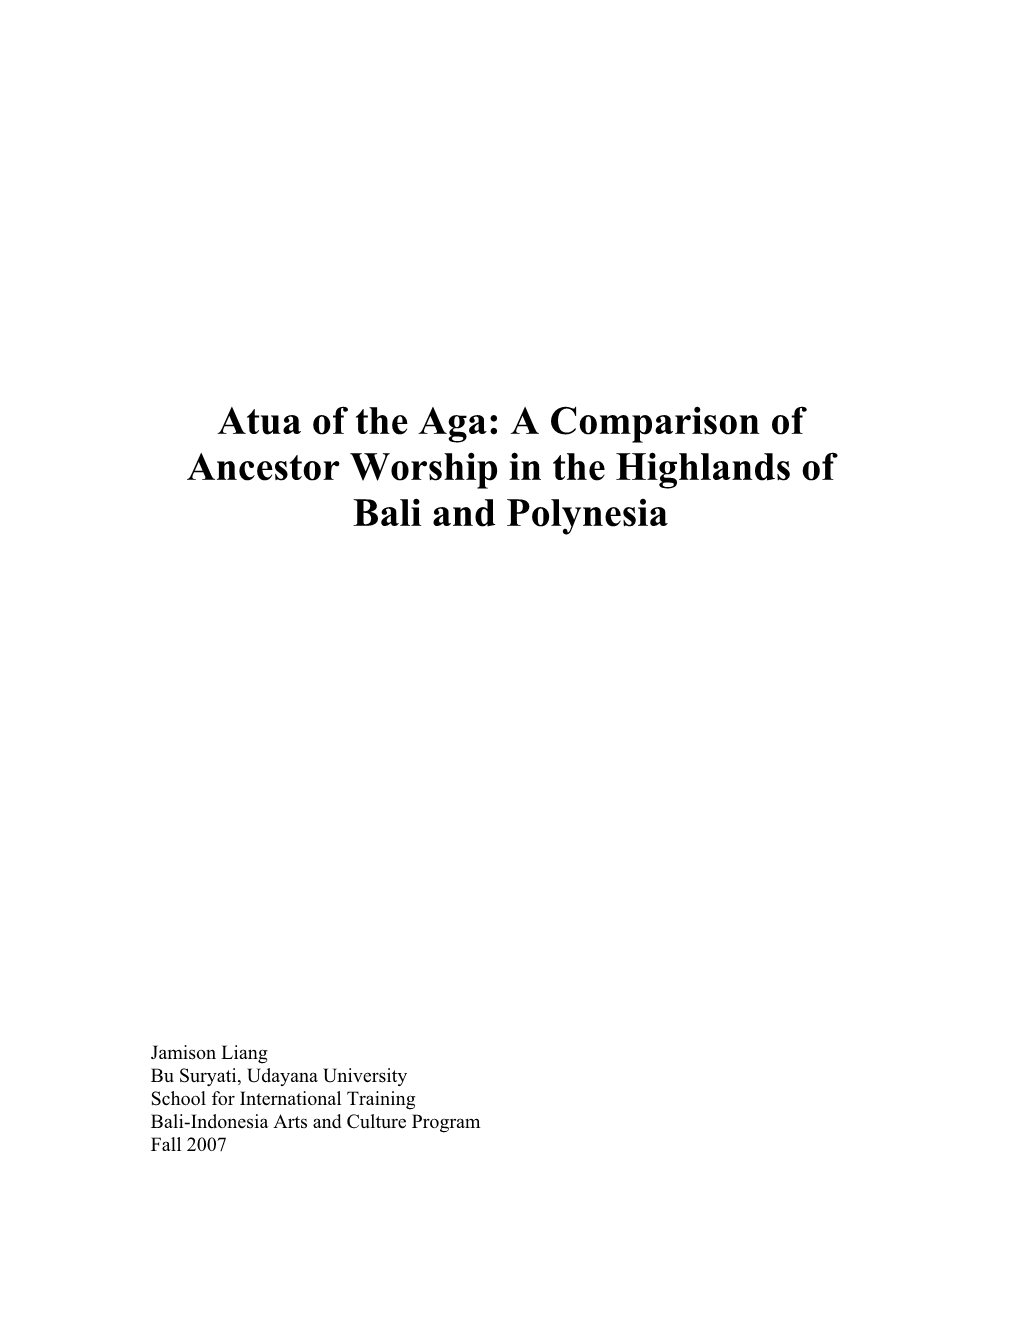 Atua of the Aga: a Comparison of Ancestor Worship in the Highlands of Bali and Polynesia